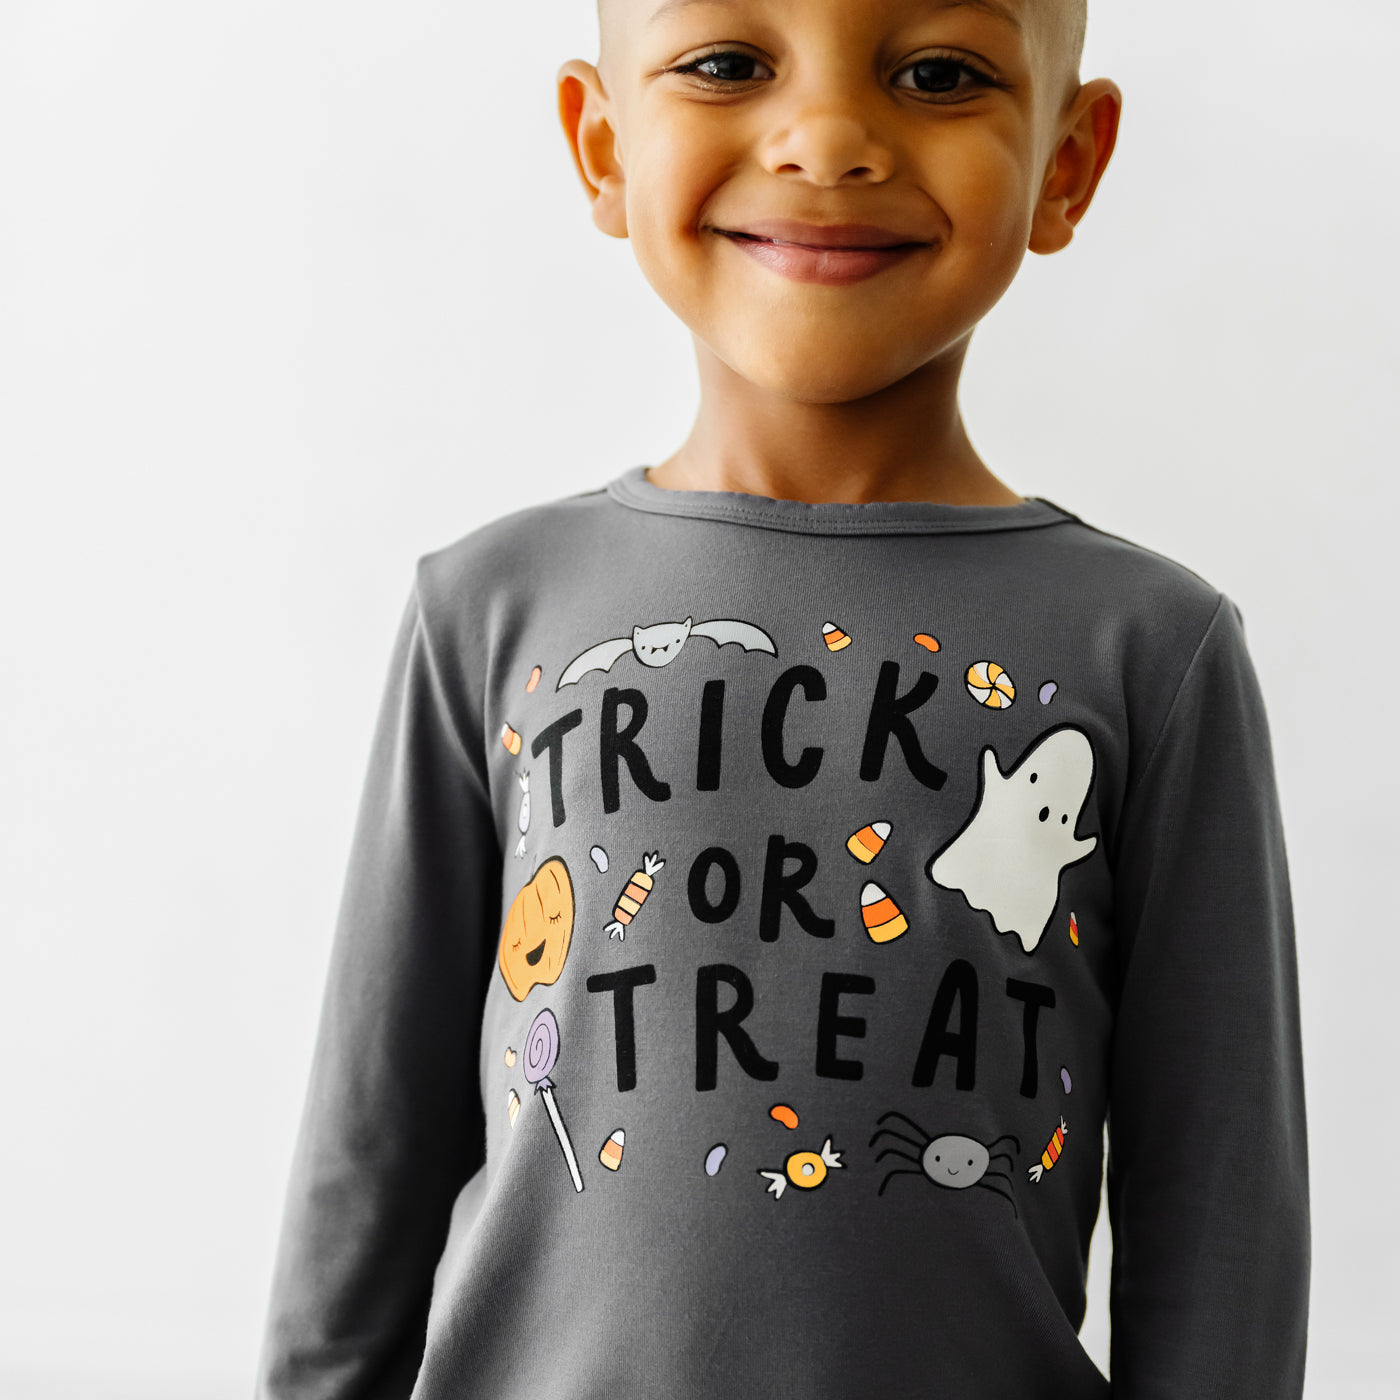 Close up image of a child wearing a Trick or Treat graphic tee